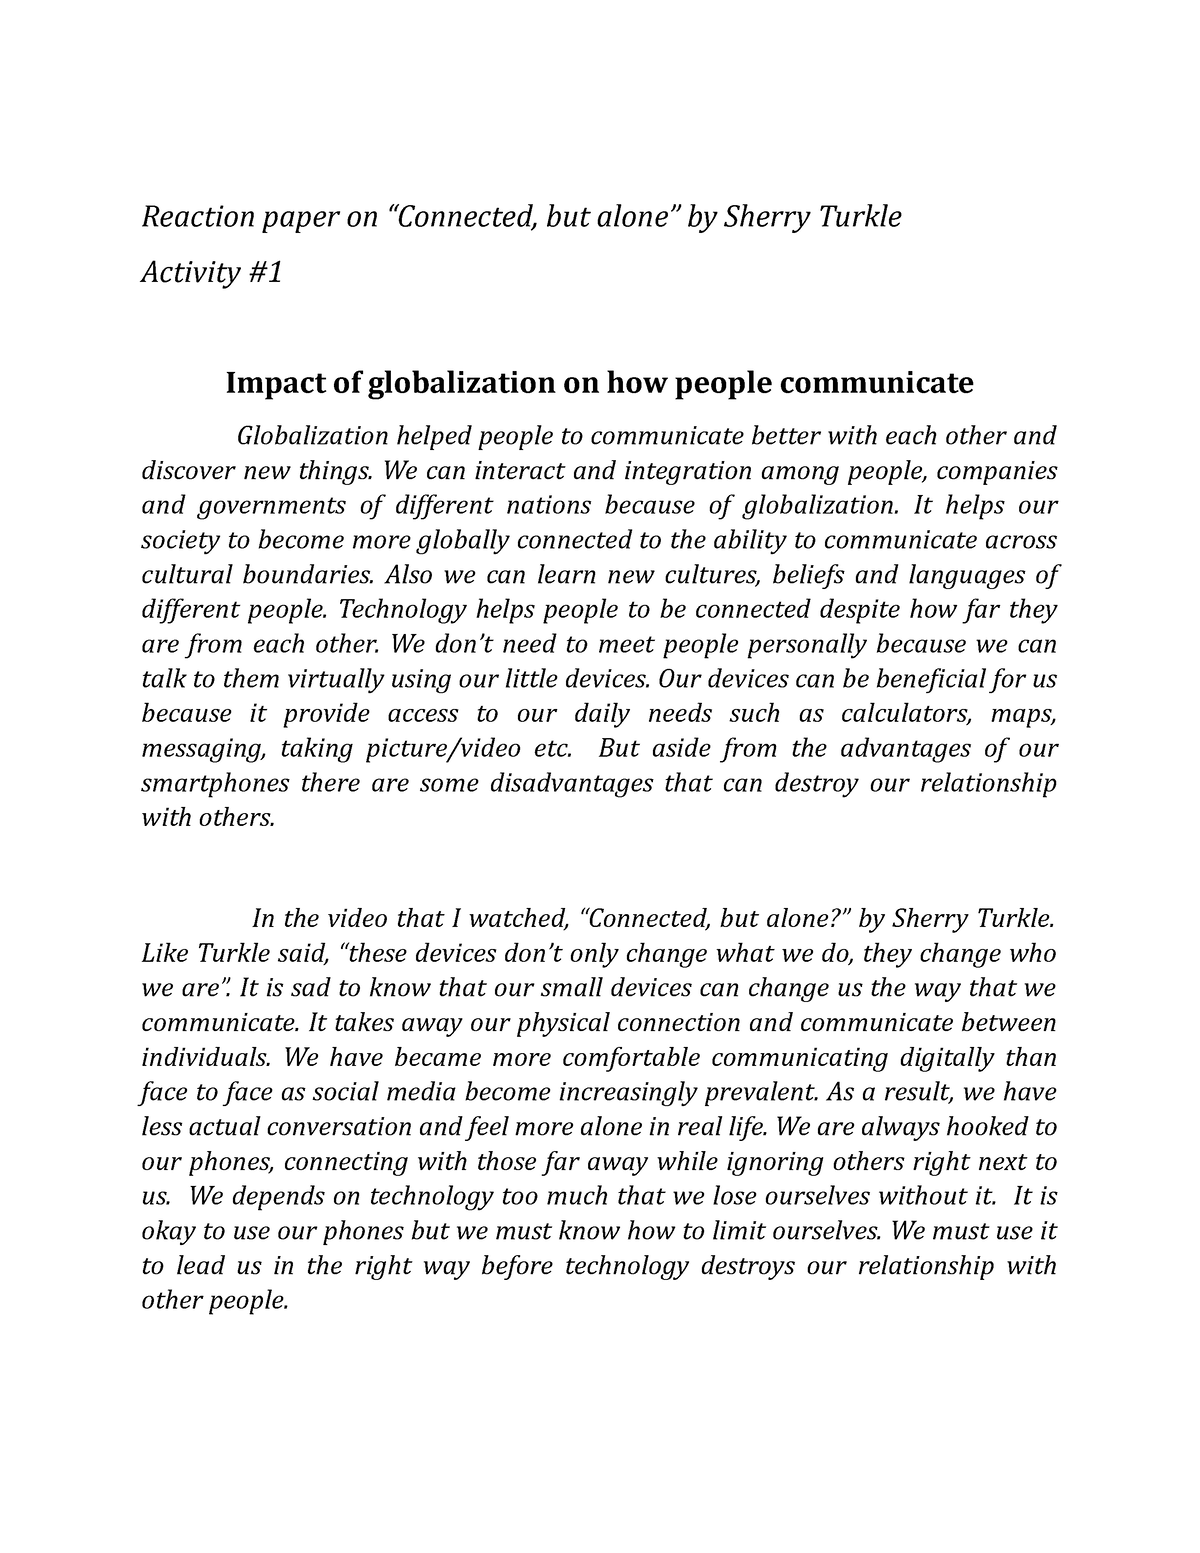 essay about the impact of globalization on communication